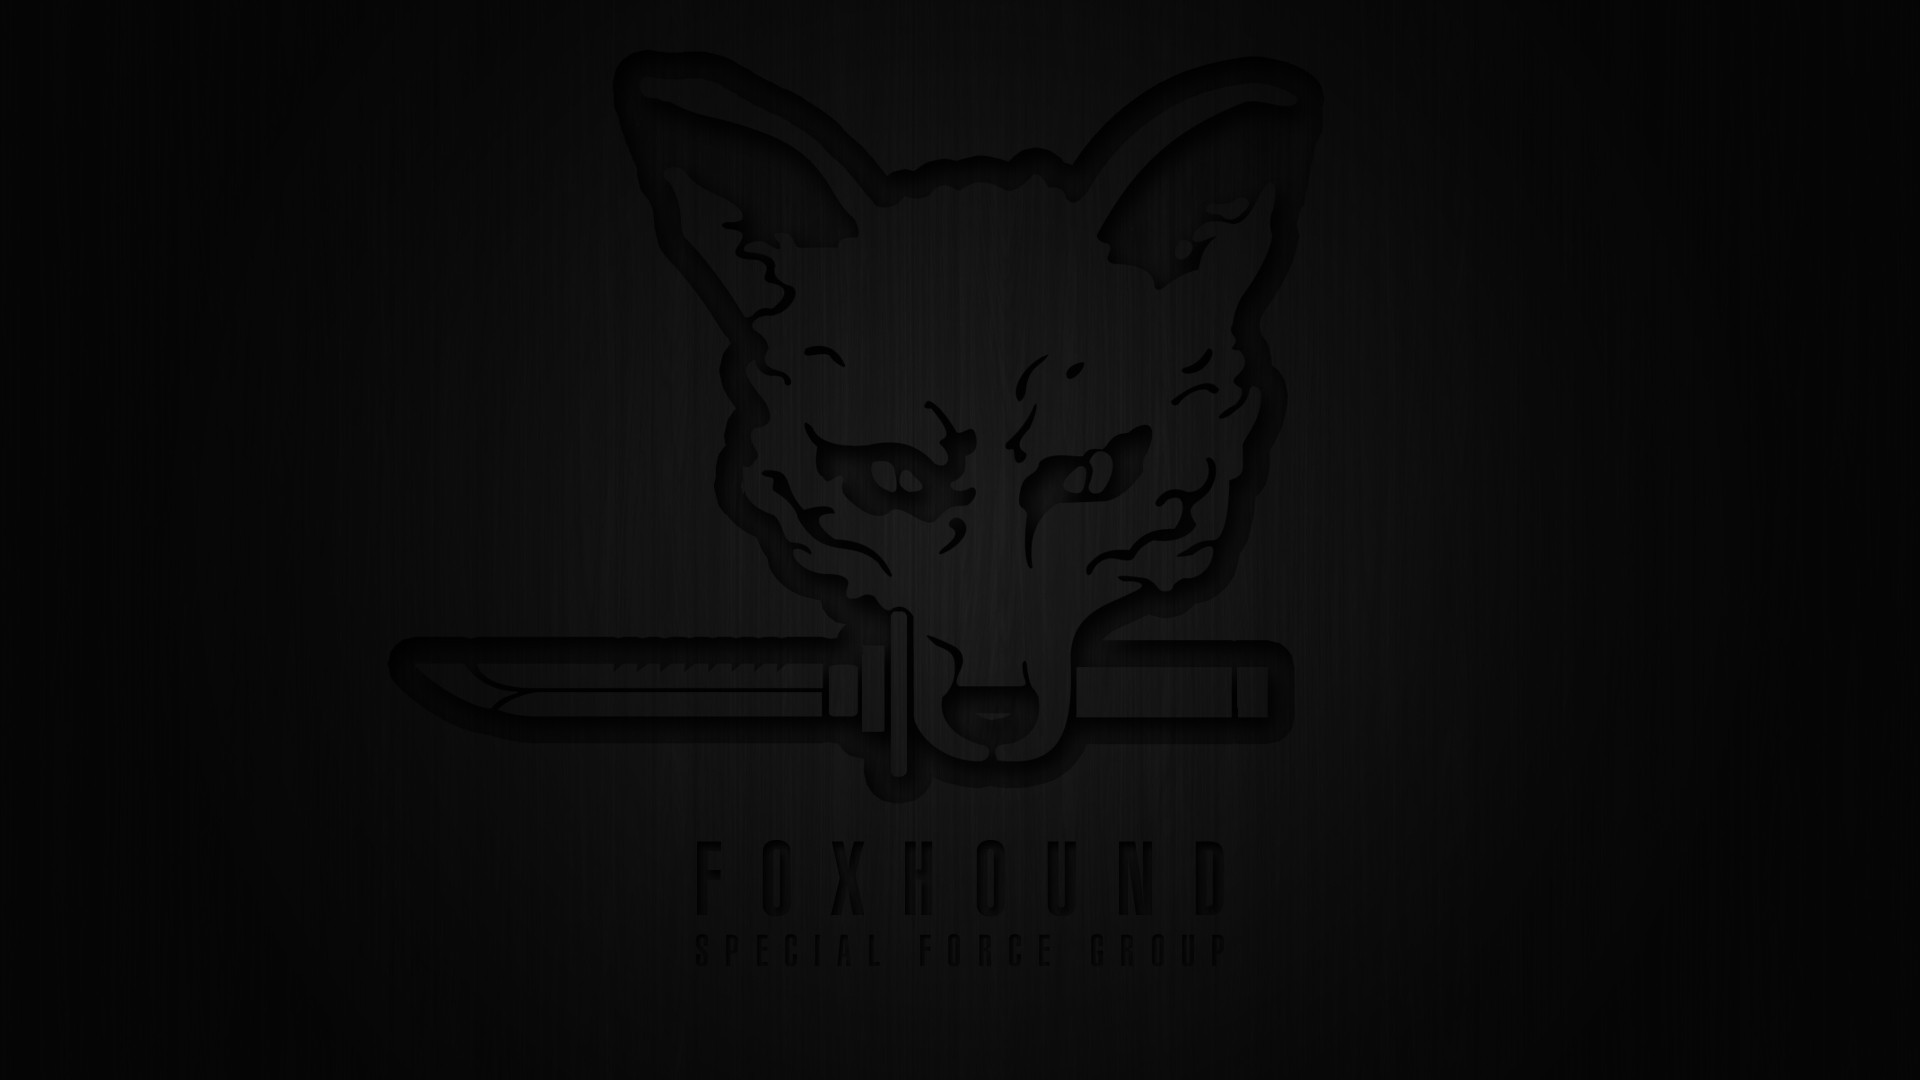 Wanted A Nice Foxhound Wallpaper So Decided To Make One And Share